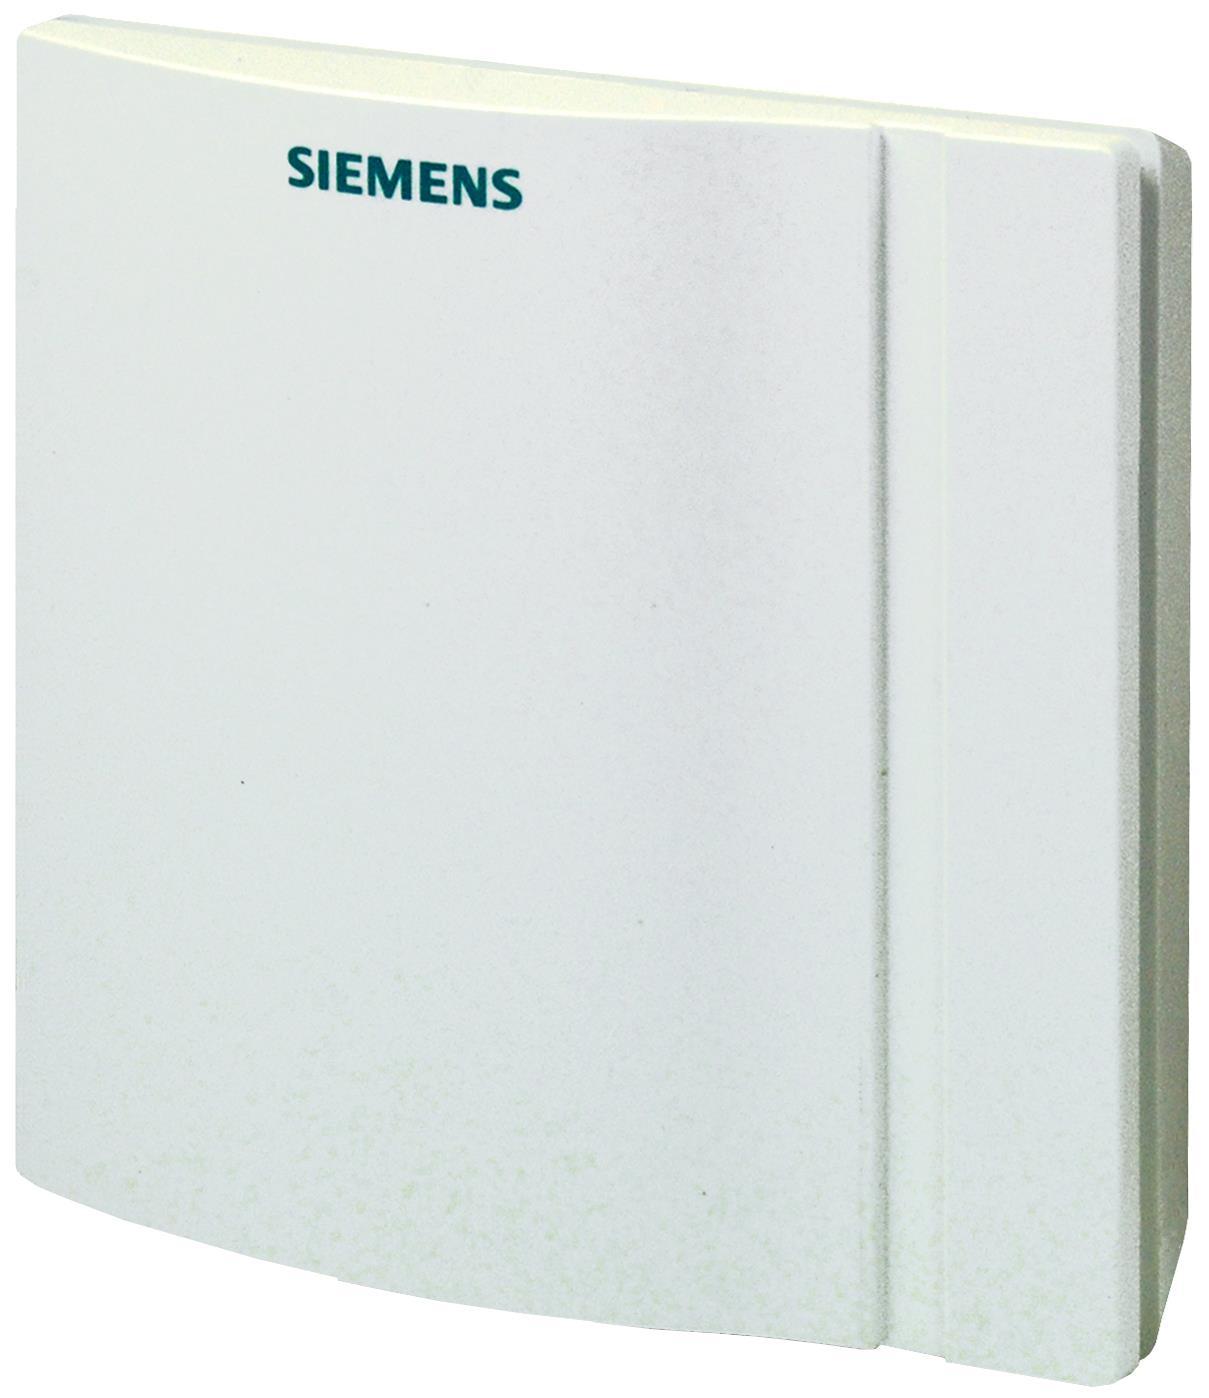 Siemens Thermostat Heat or Cool